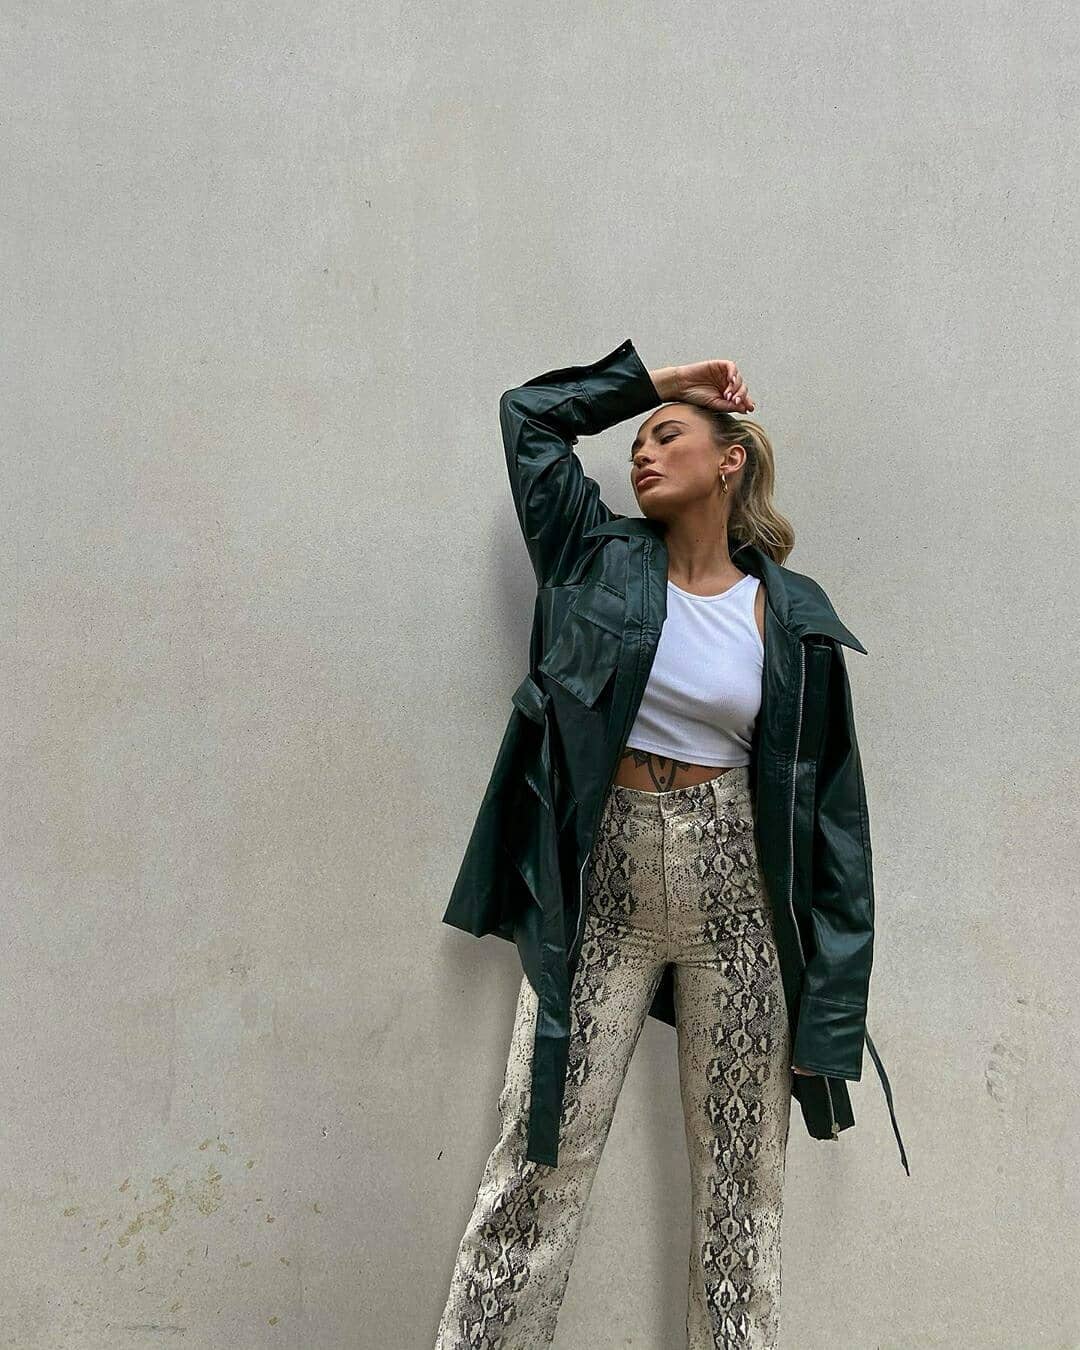 boohoo - MAKE THE A/W SWITCH 🌩️
​Shop new season jackets via the link in the bio 🔗